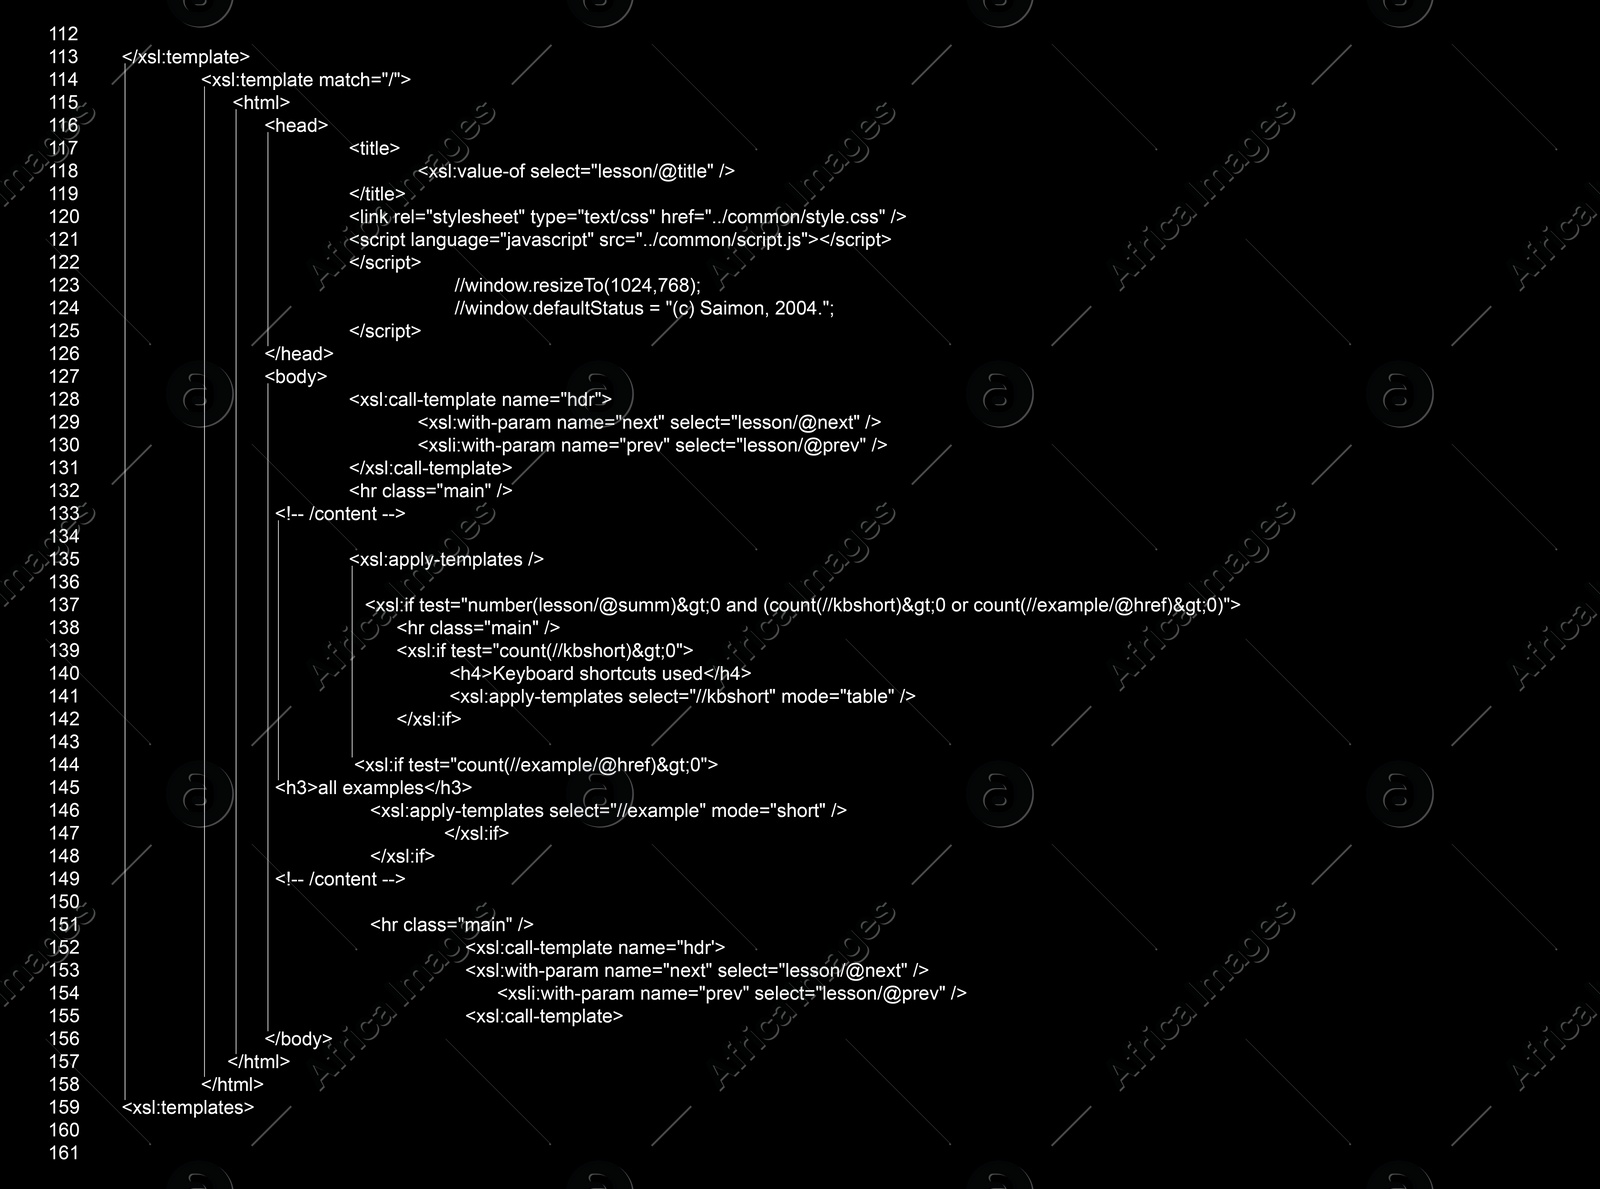 Illustration of Source code written in programming language on black background